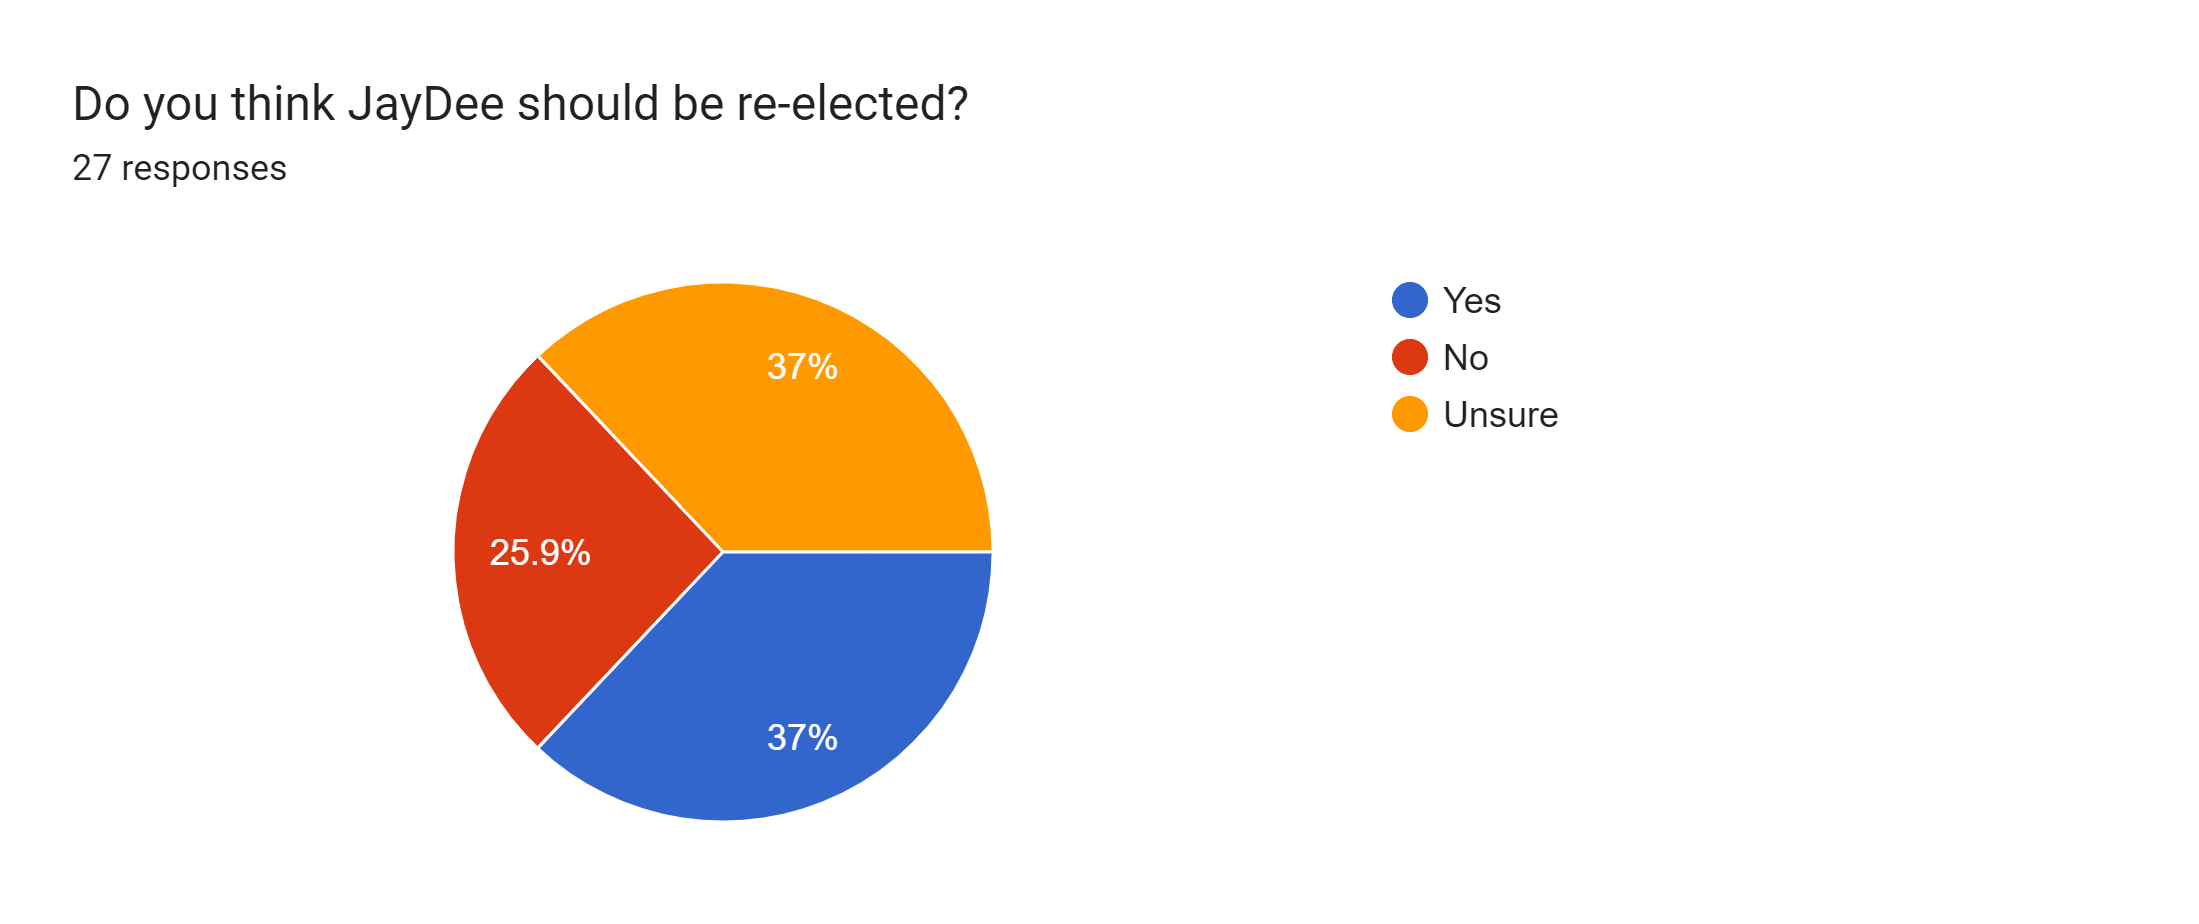 Forms response chart. Question title: Do you think JayDee should be re-elected?. Number of responses: 27 responses.